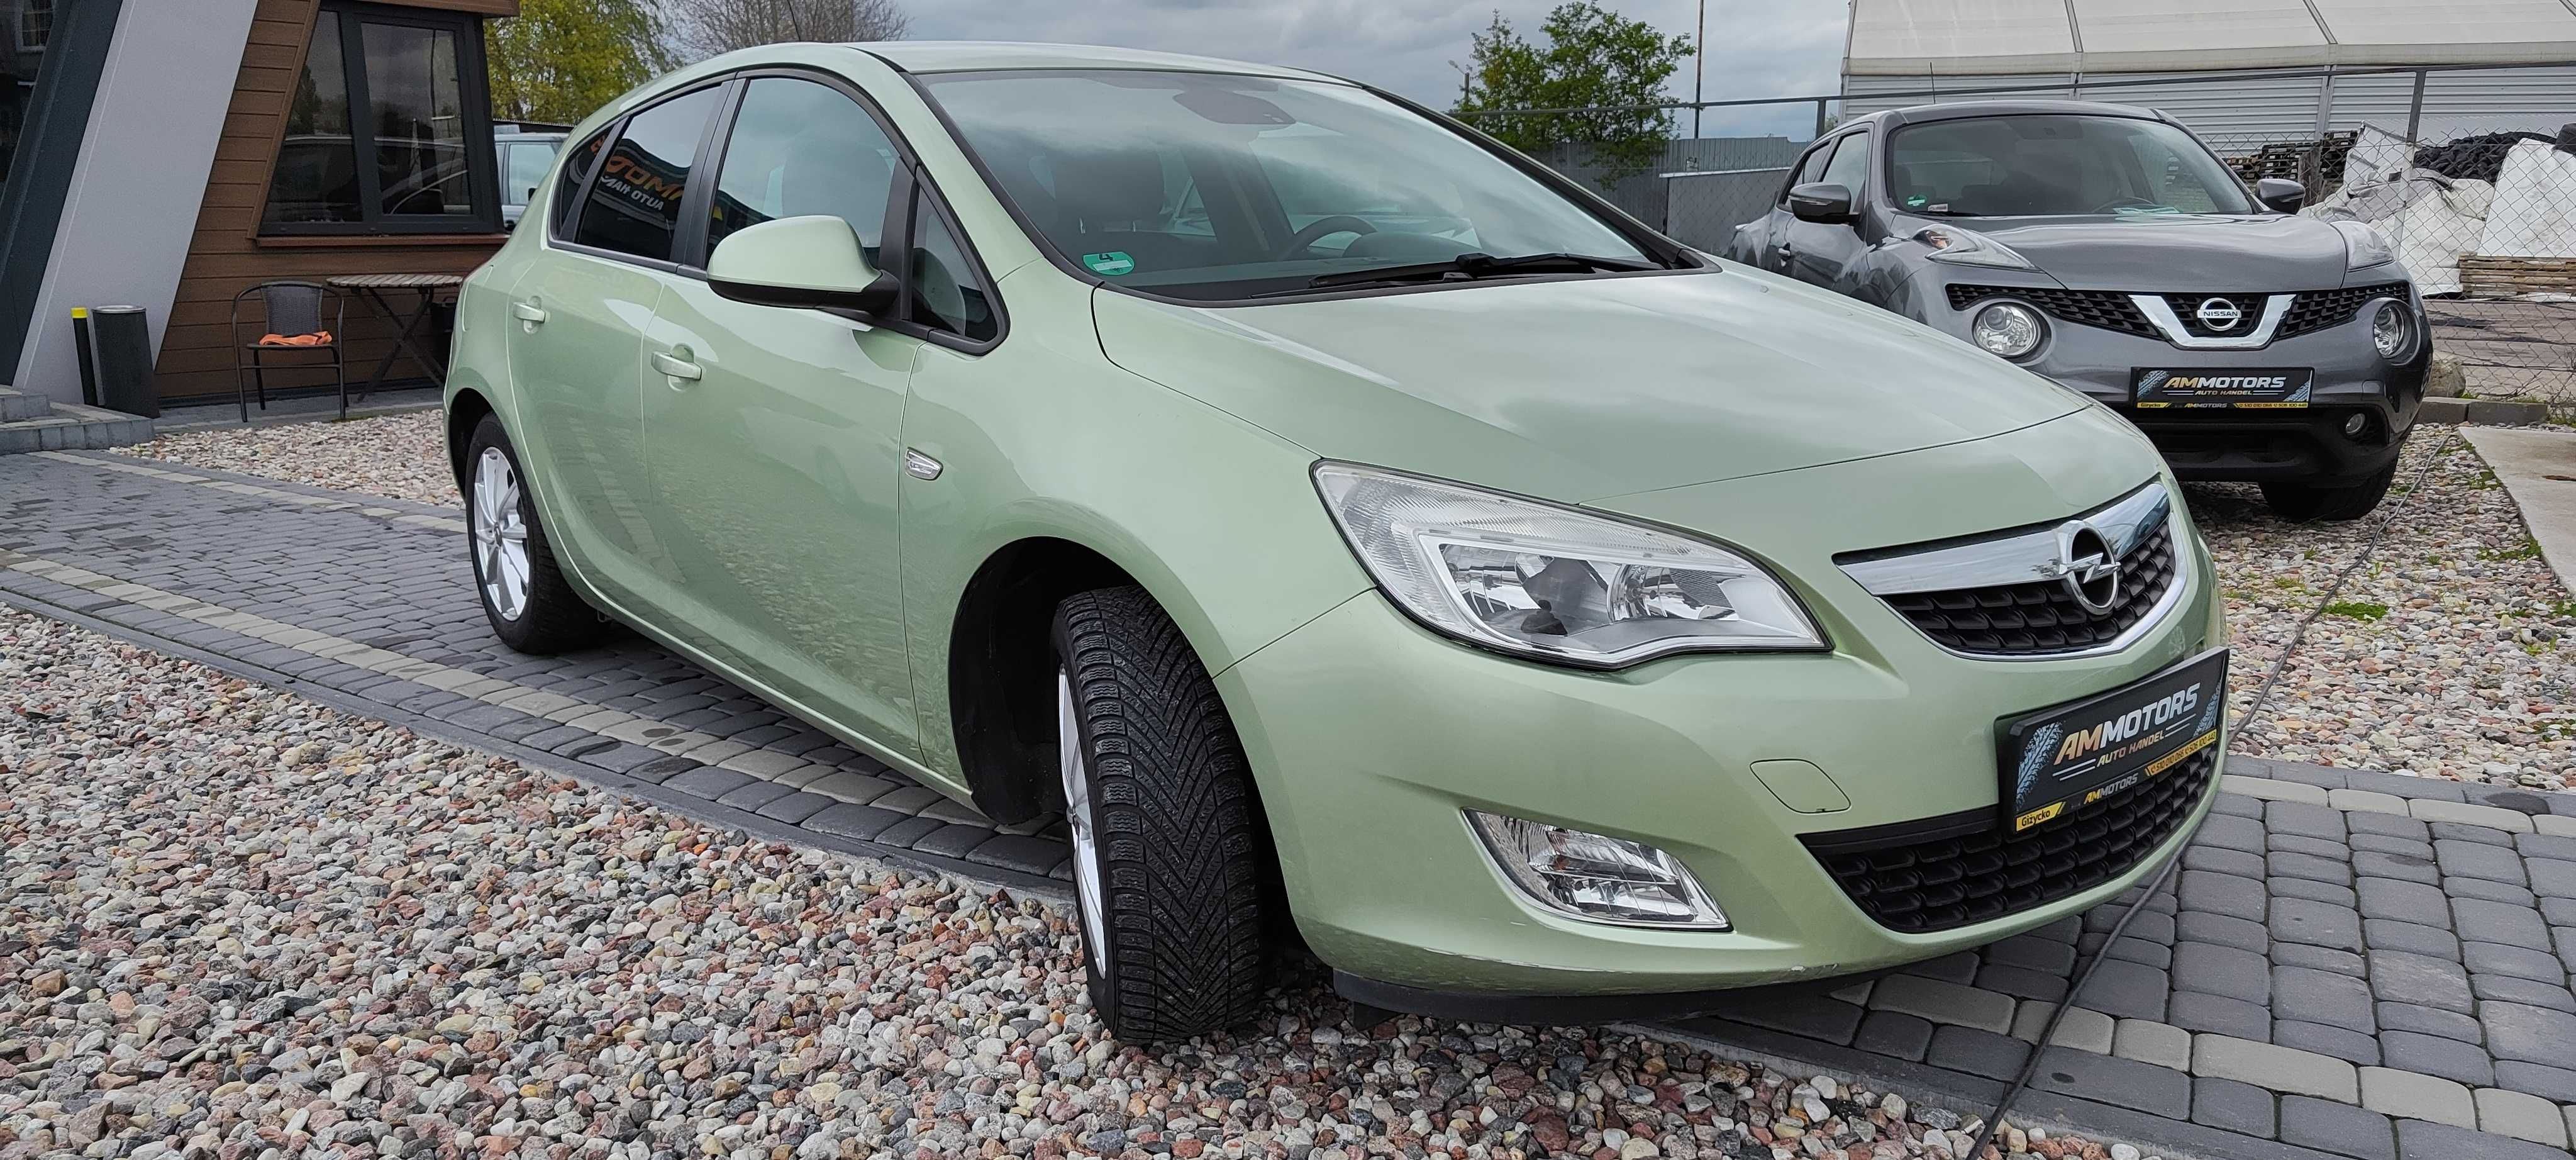 Opel Astra 1.4 benzyna